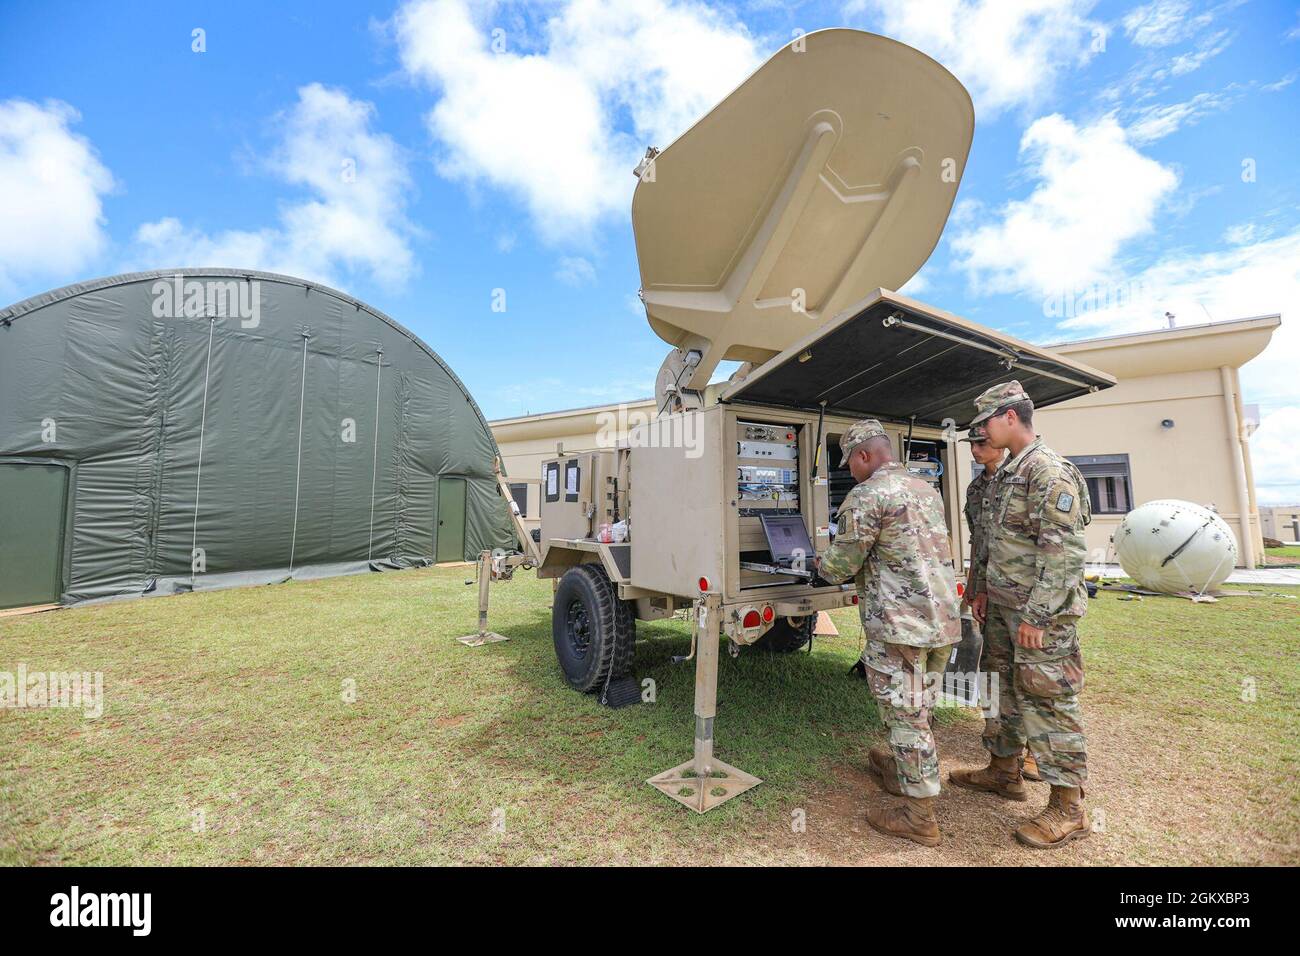 U.S. Army Soldiers from the 307th Expeditionary Signal Battalion, 516th Signal Brigade out of Fort Shafter, Hawaii, and 40th ESB, 11th Corps Signal Brigade out of Fort Huachuca, Arizona, work together to establish satellite communication support for Exercise Forager 21 at Guam National Guard Headquarters July 17, 2021. Forager 21 is a U.S Army Pacific exercise designed to showcase mission readiness and utilize multi-domain capabilities in a joint environment in the Pacific Theater. Stock Photo